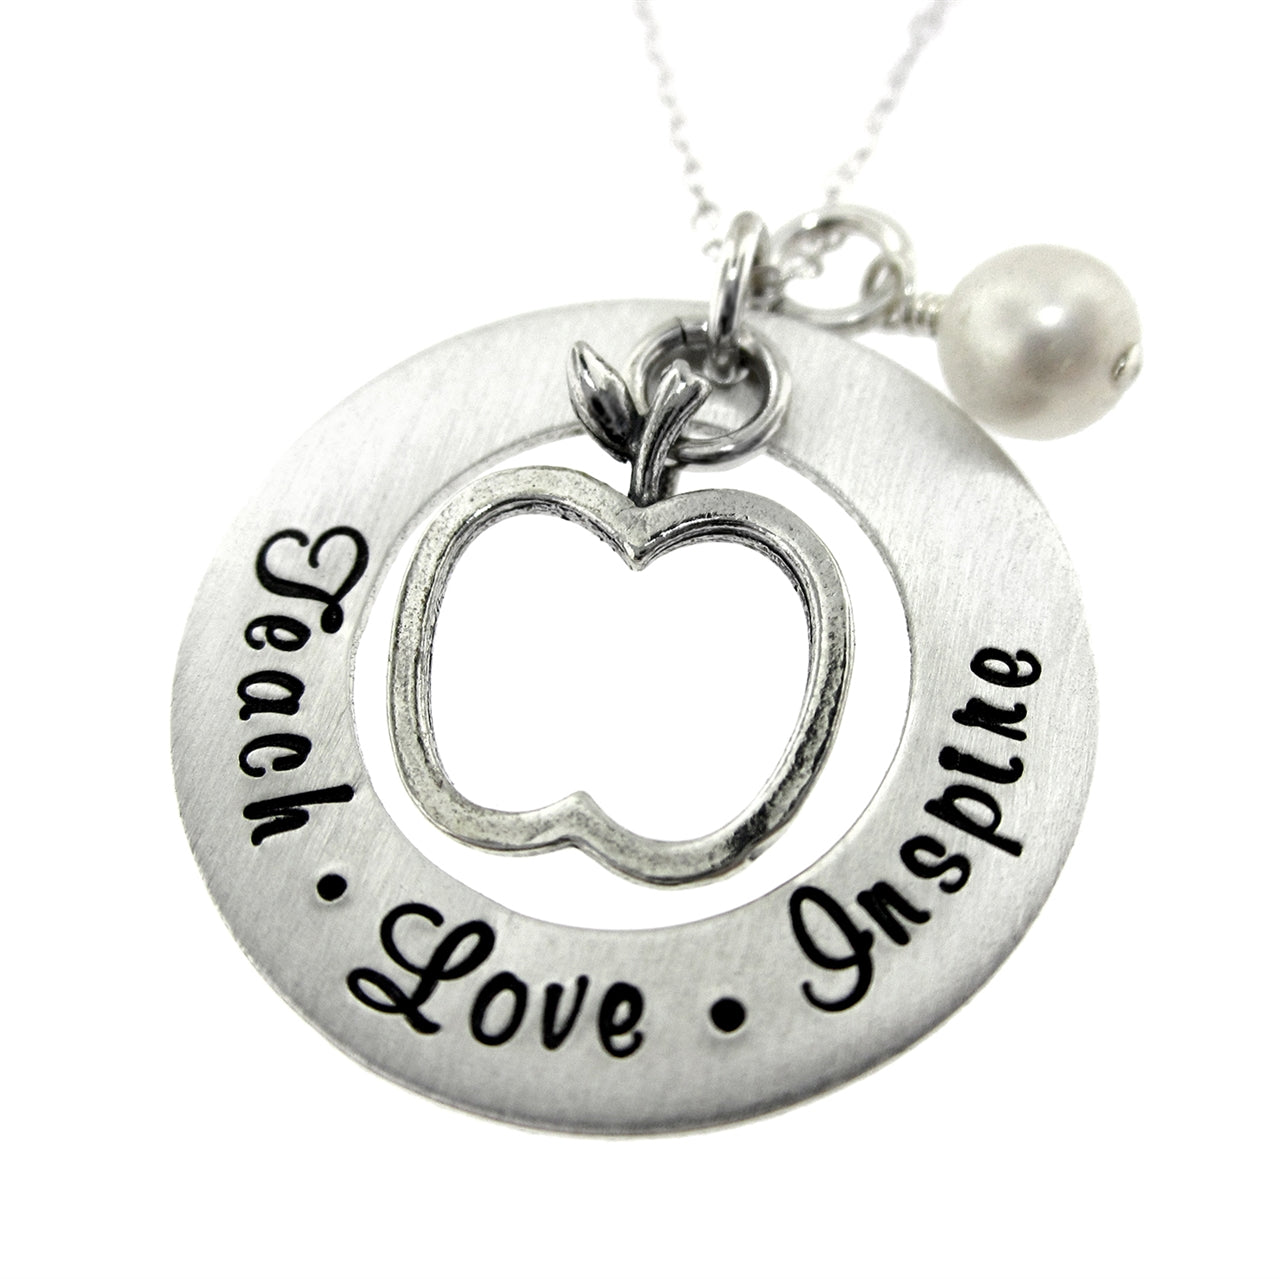 Make a difference Personalized Sterling Silver Washer with Apple Charm Necklace